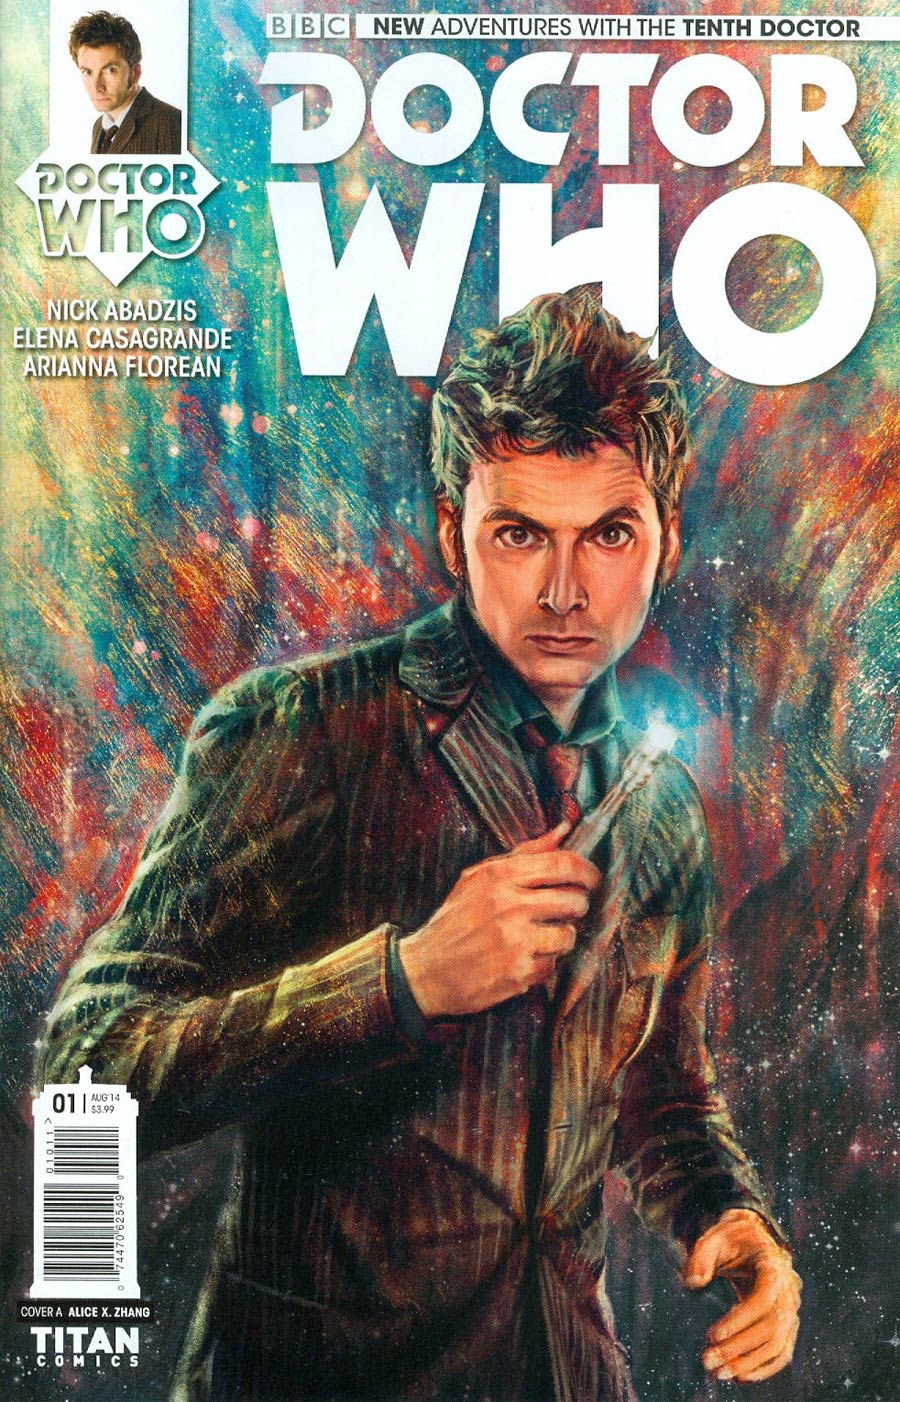 Doctor Who 10th Doctor #1 Cover A 1st Ptg Regular Alice X Zhang Cover